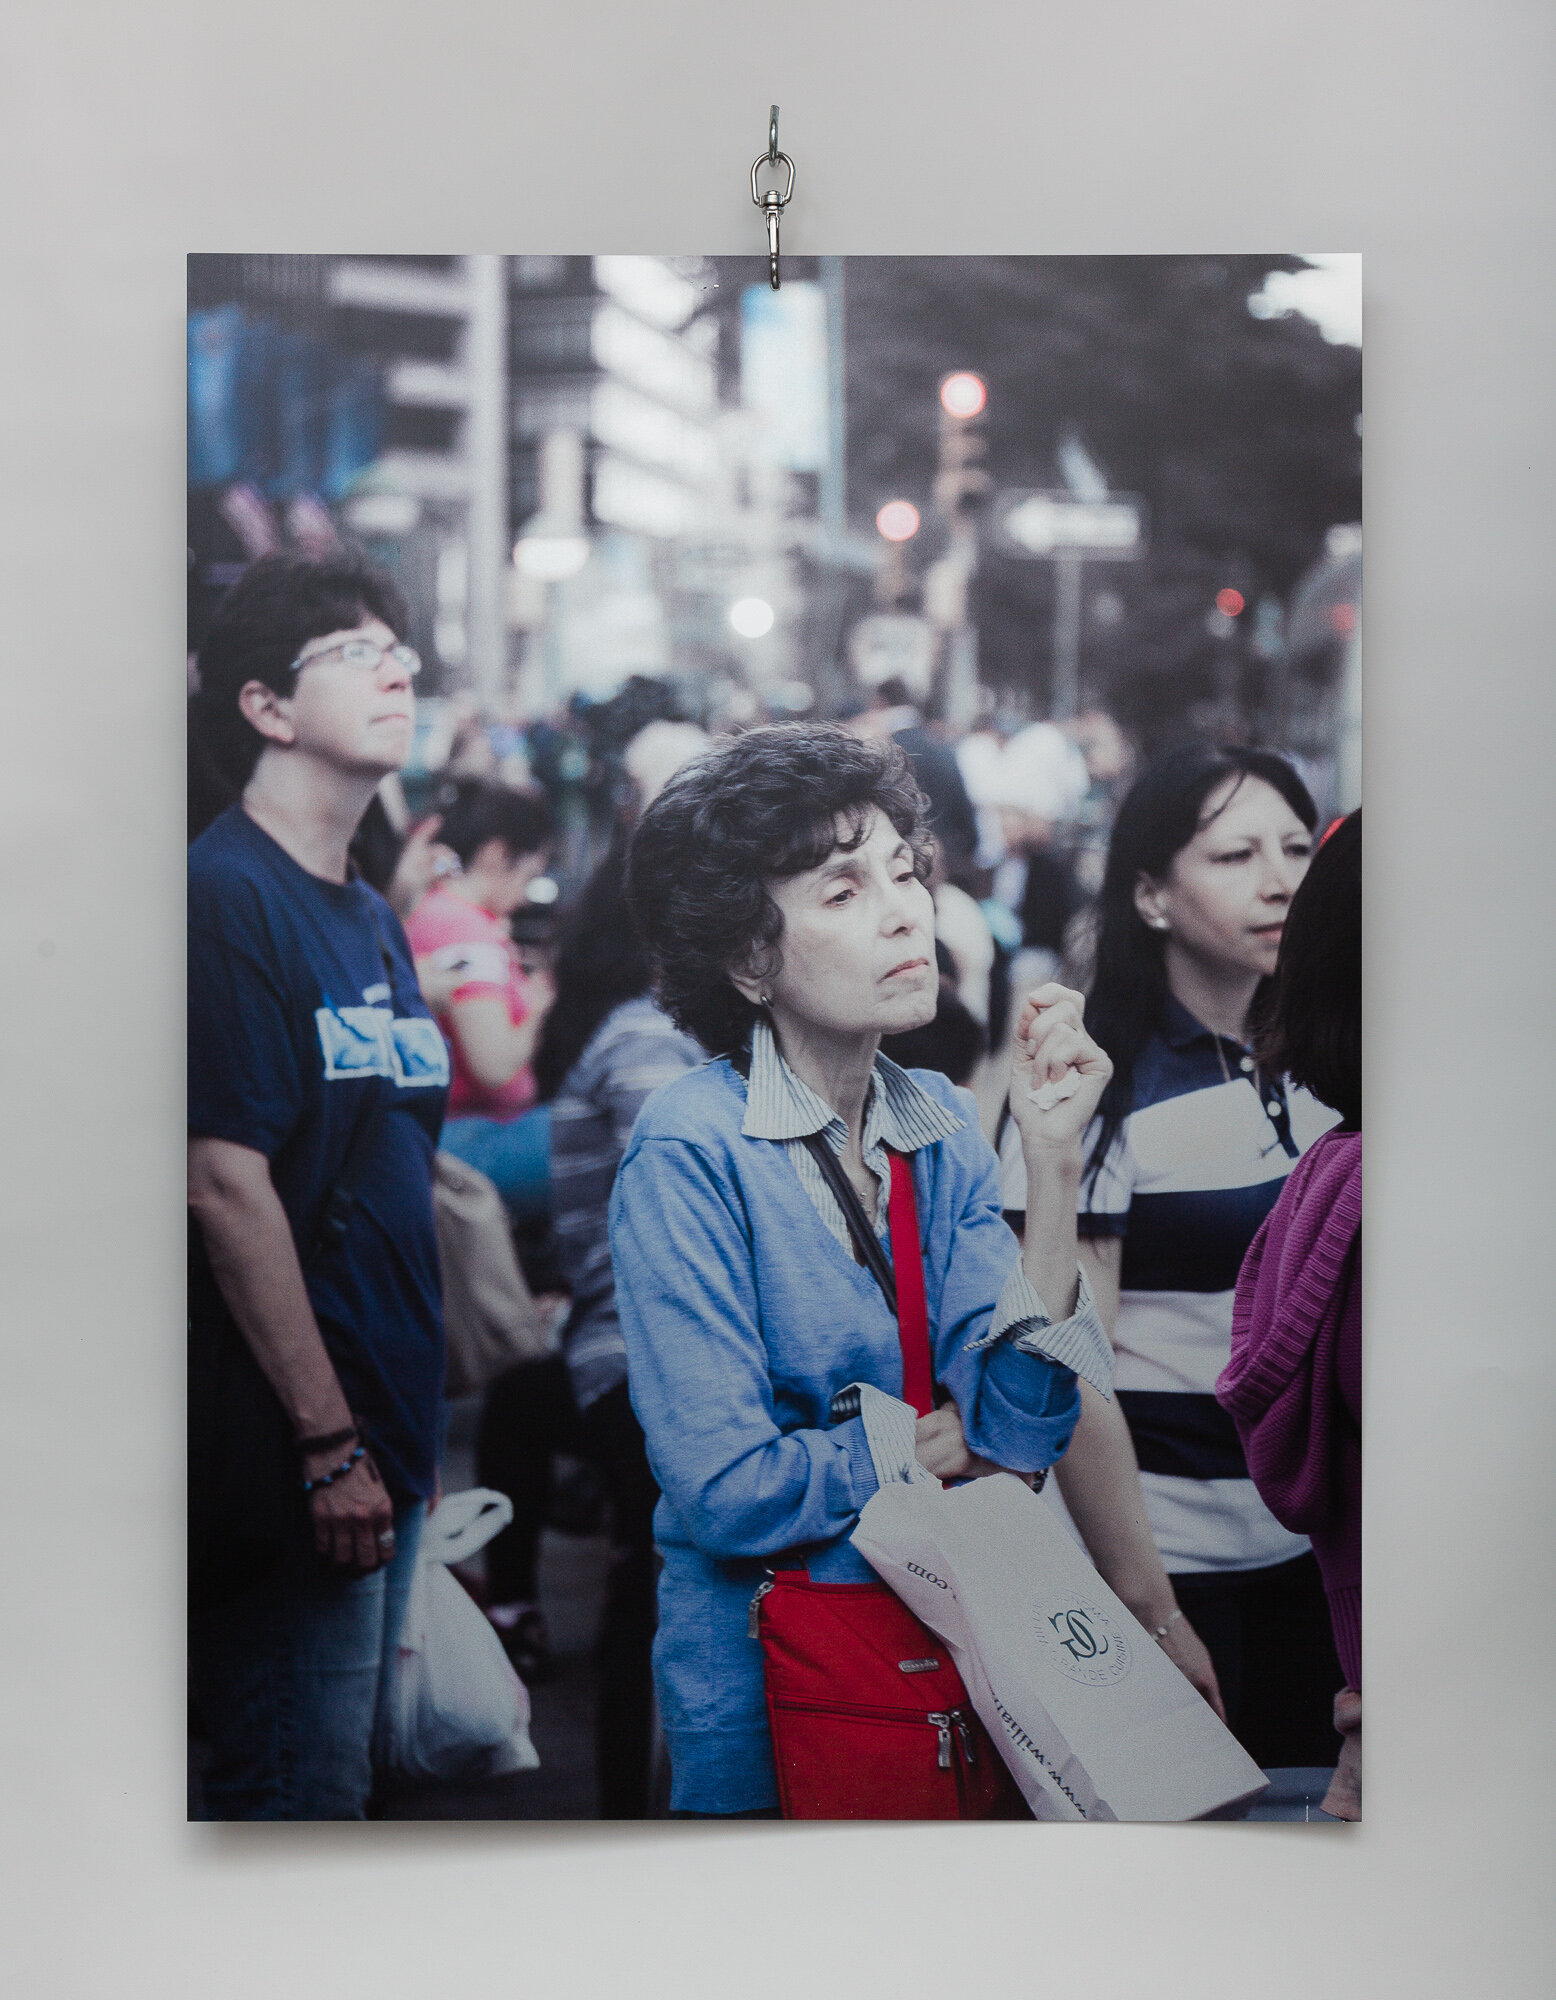   Columbus Circle (Panel 3, Side A) , 2015/19, Double-sided print on aluminum, 40 x 30 inches 